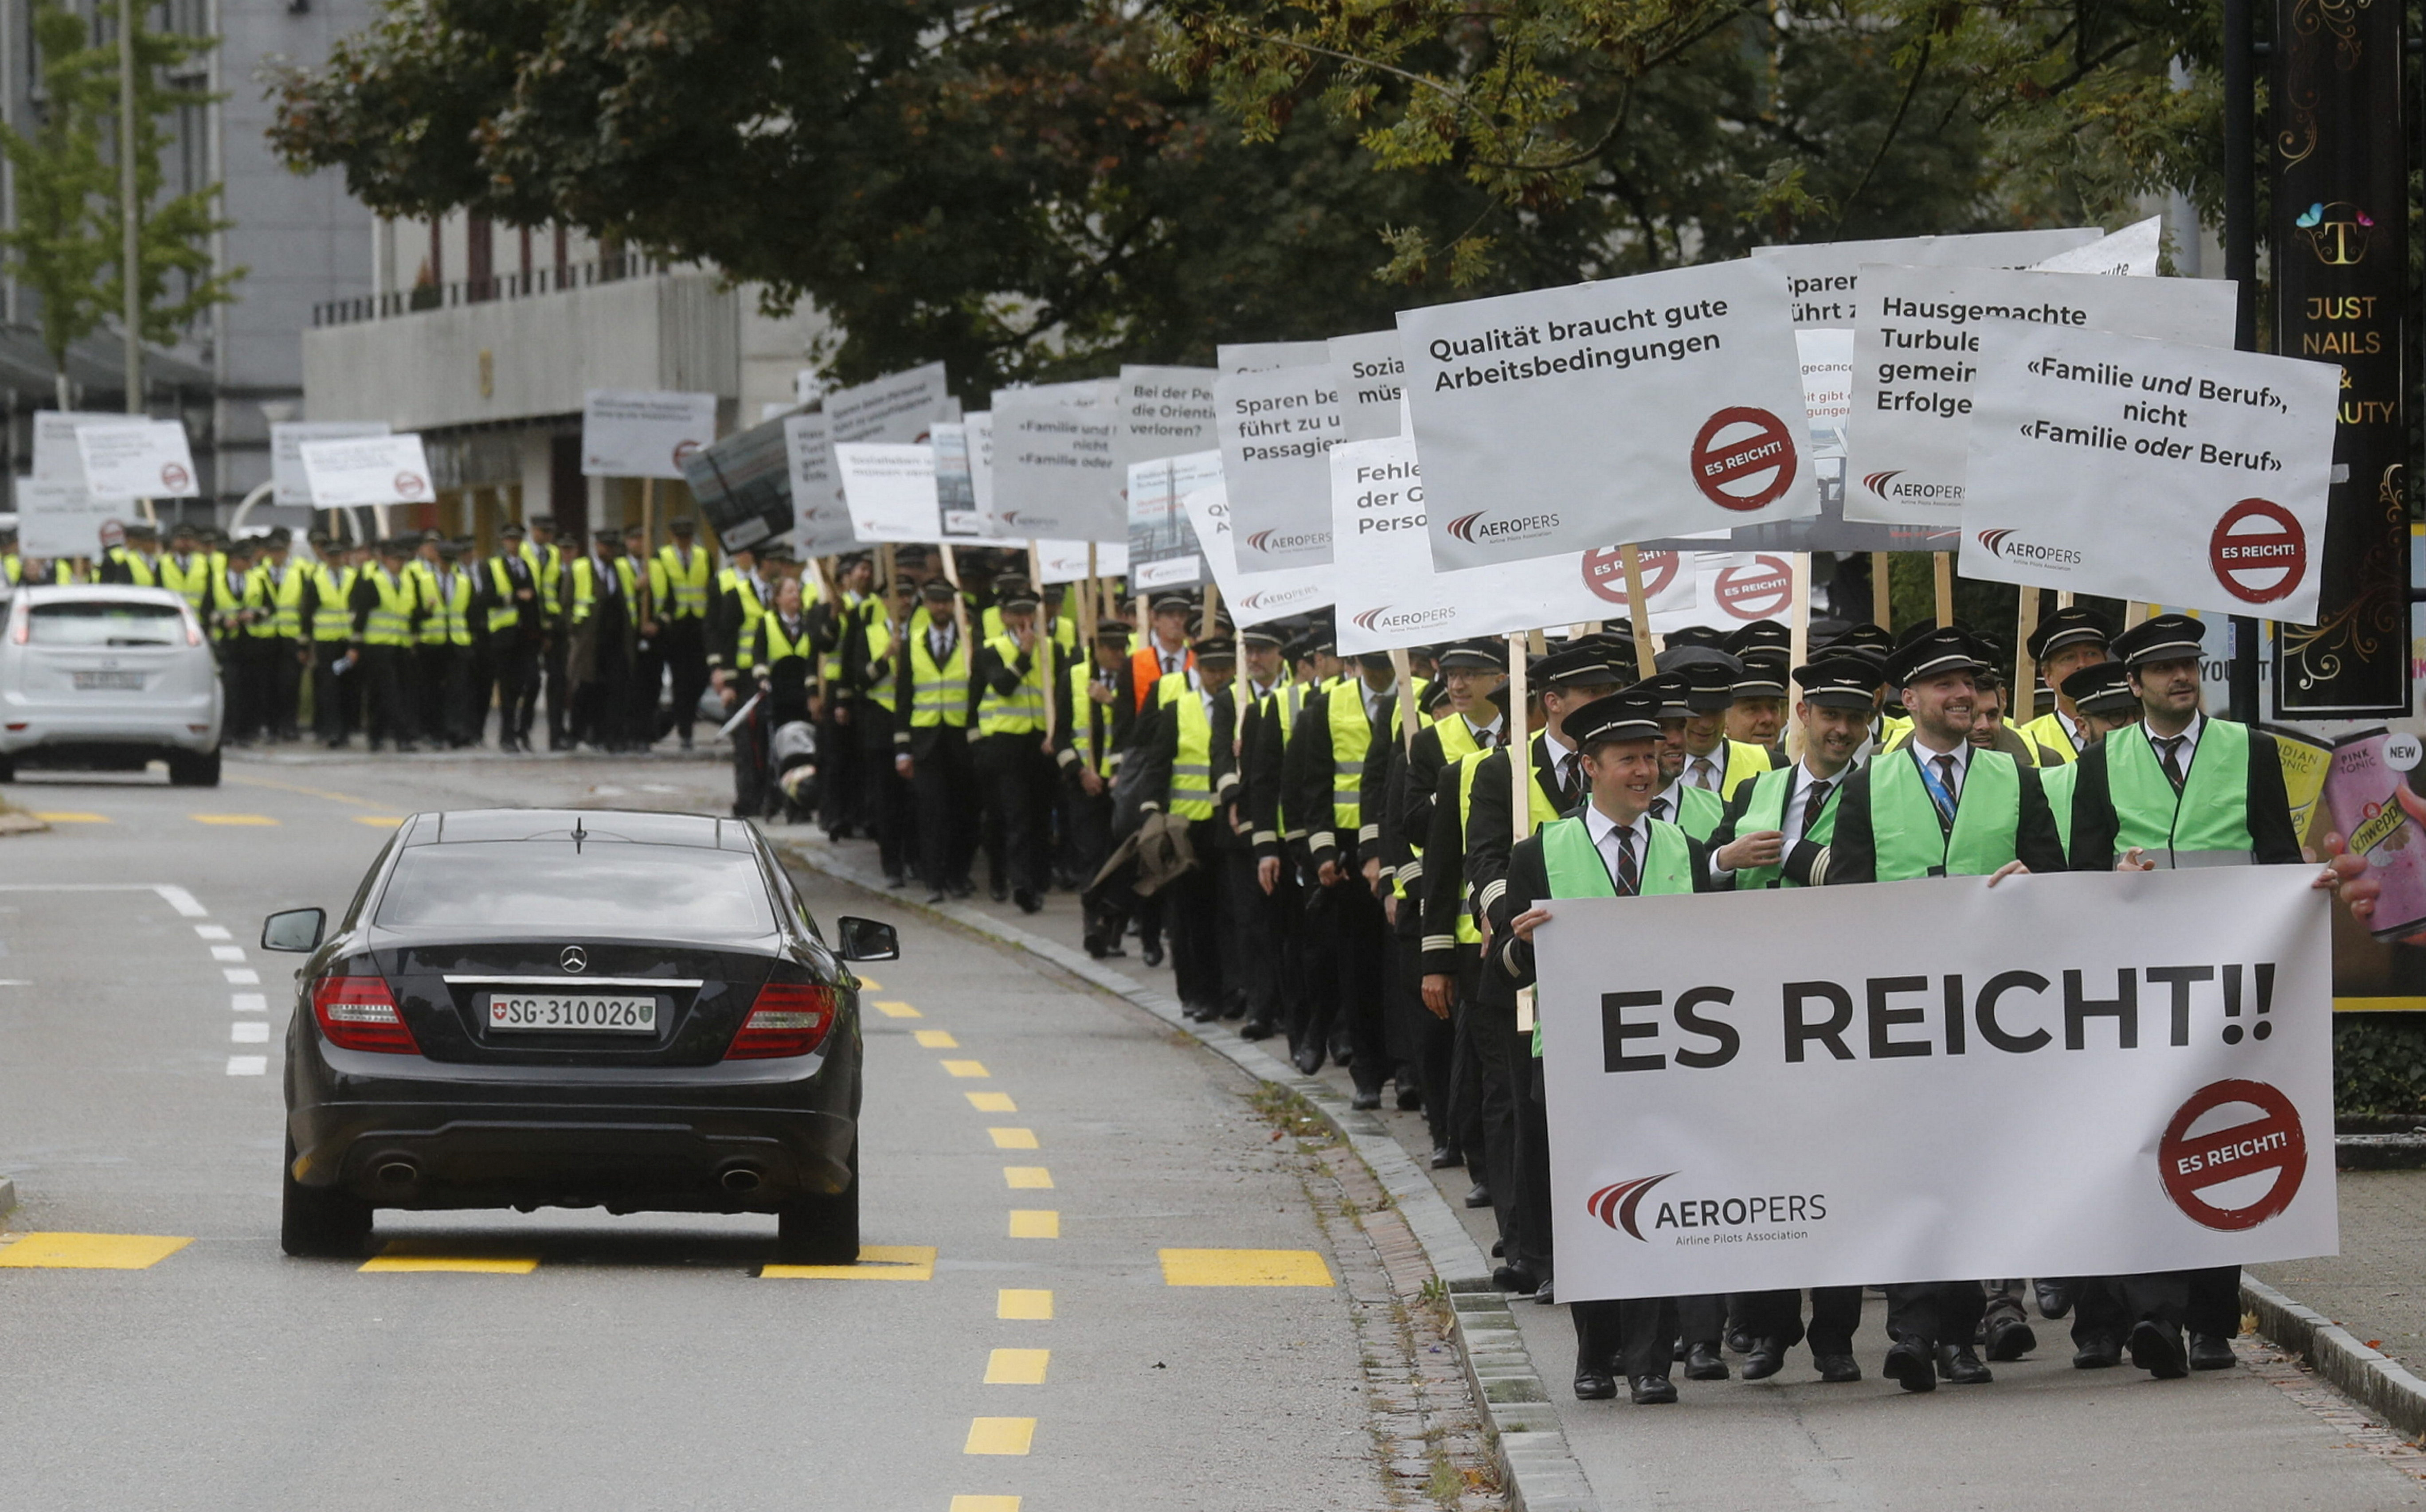 Members of AEROPERS protest in front of the headquarters of Swiss International Air Lines in Kloten